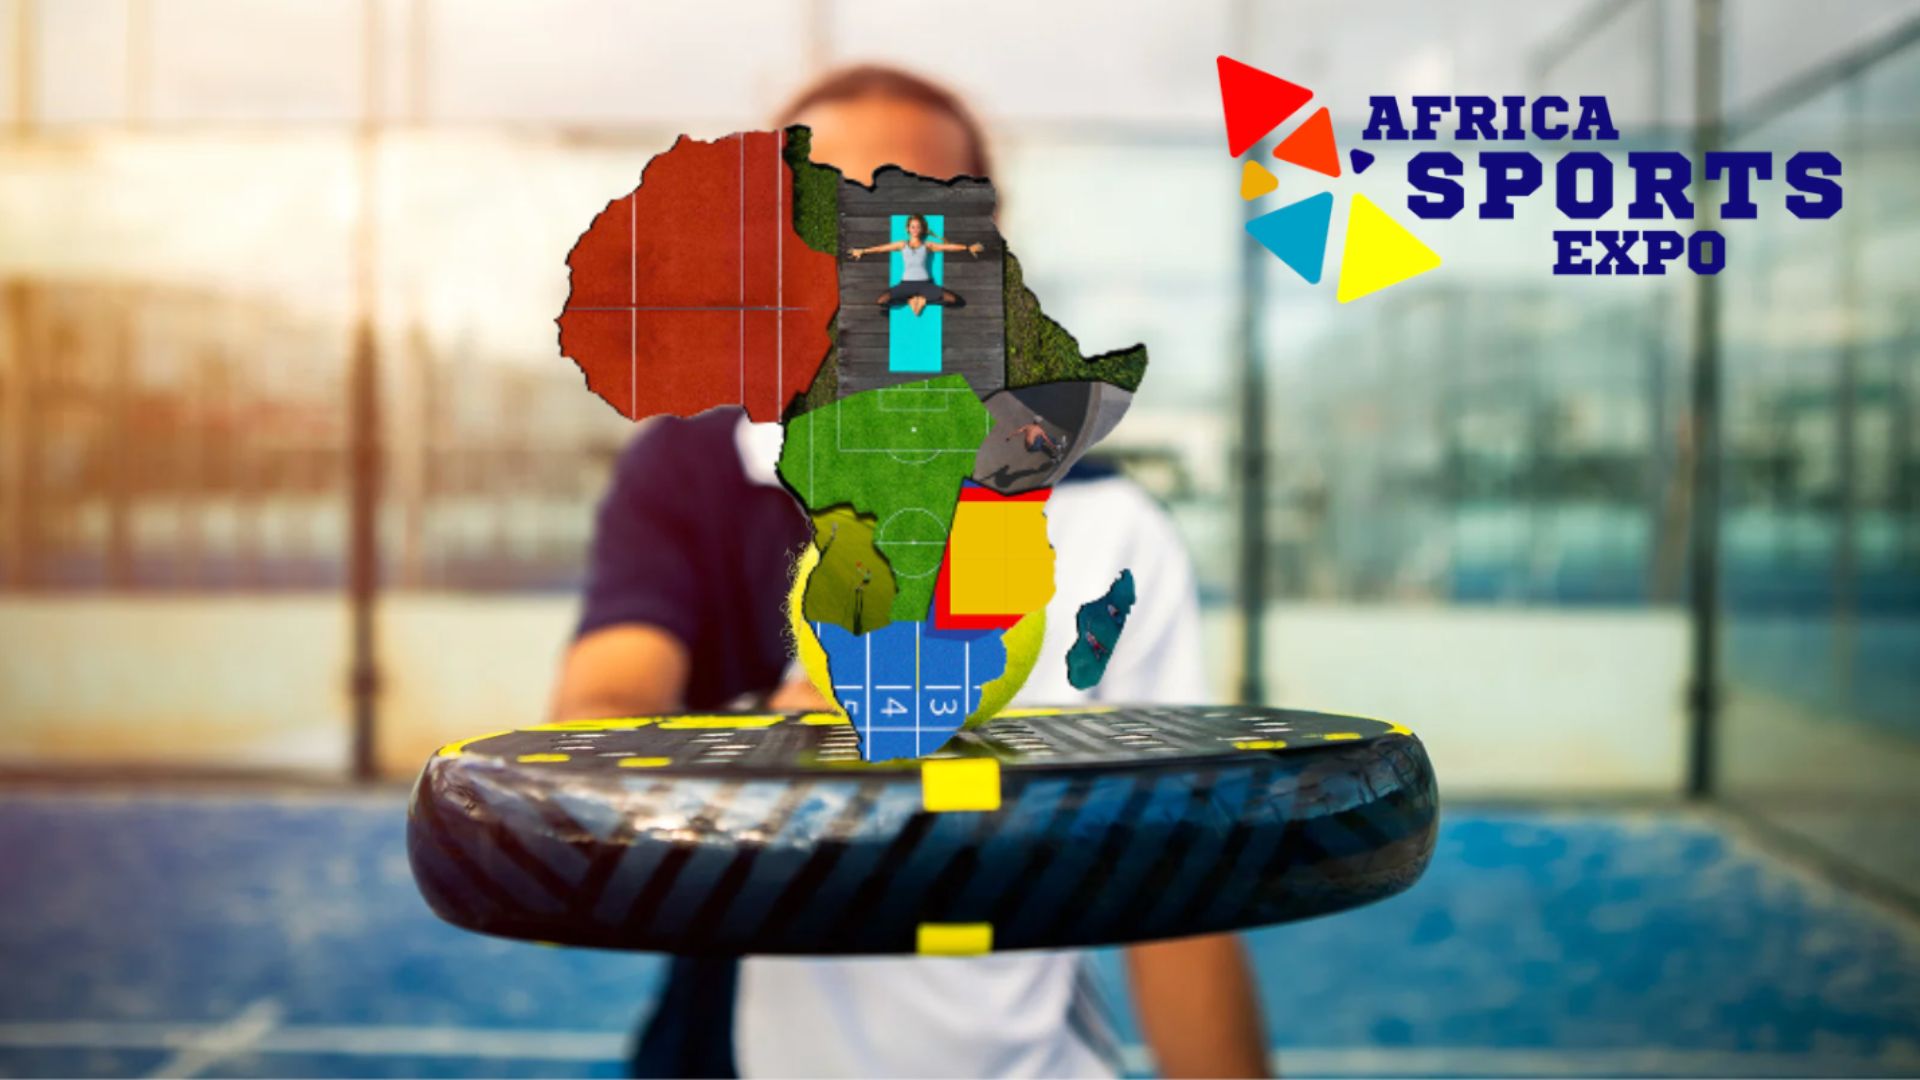 Africa Sports Expo: la padel guanyant terreny a l'Àfrica